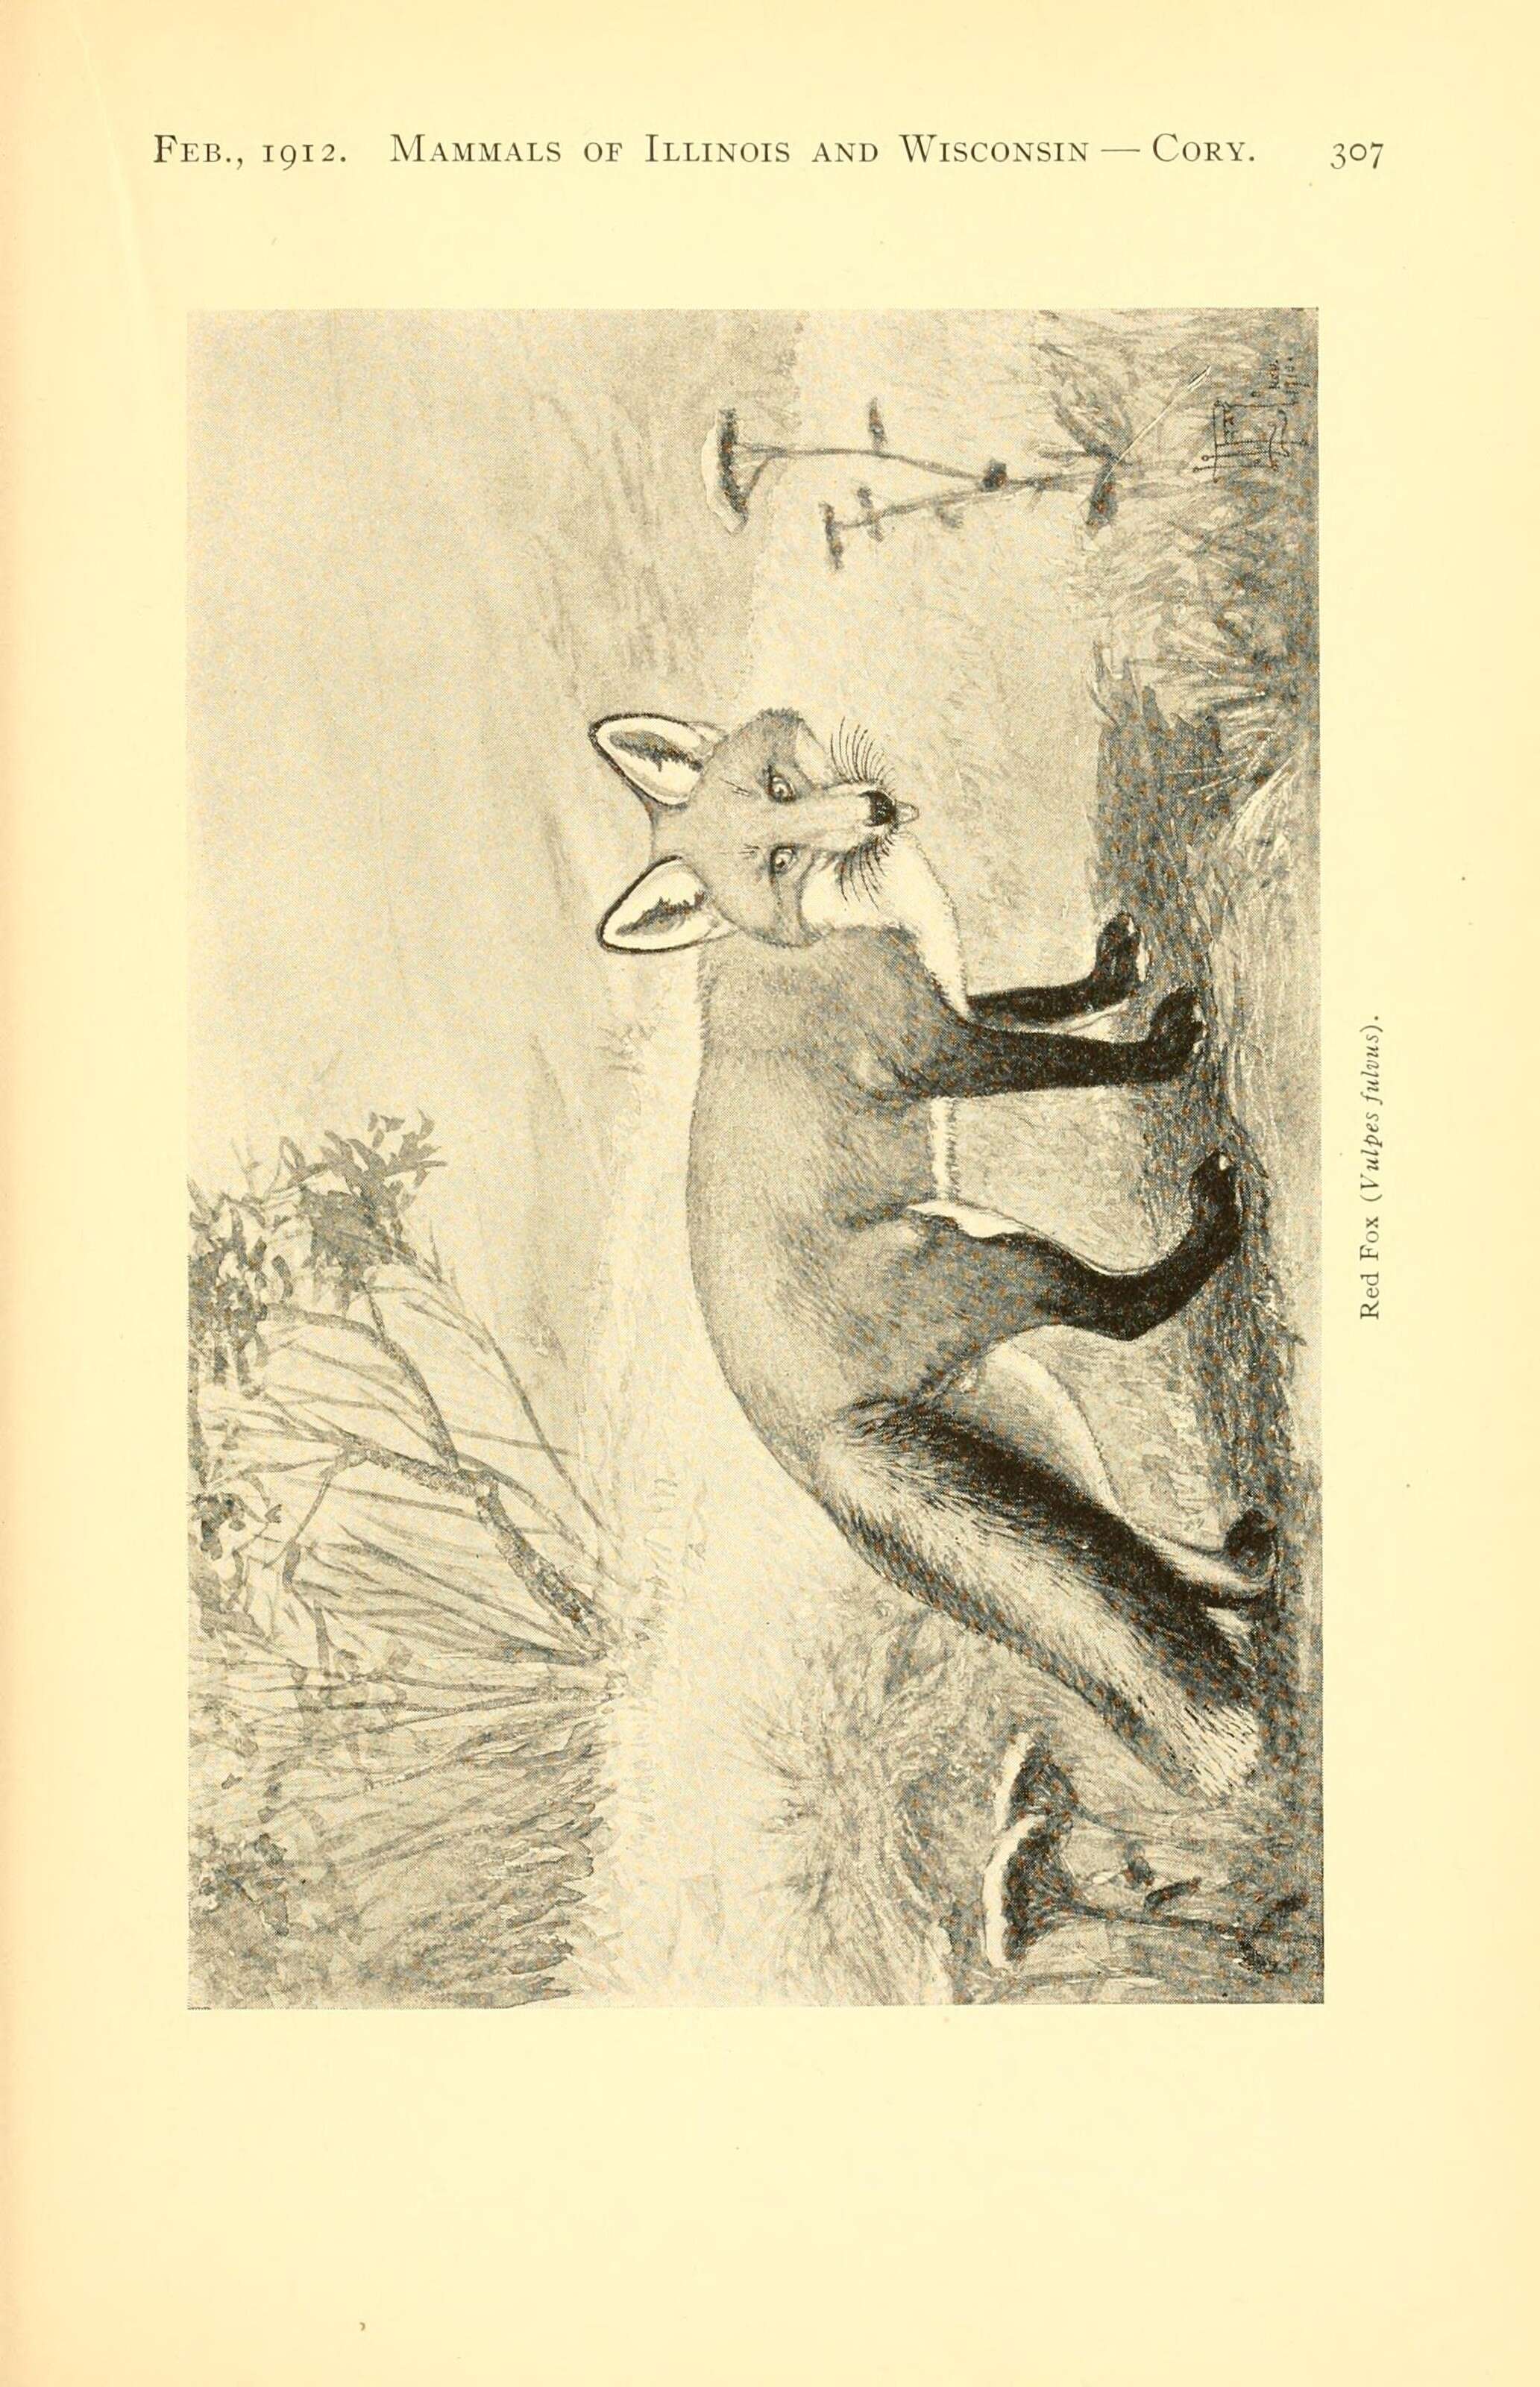 Image of coyotes, dogs, foxes, jackals, and wolves